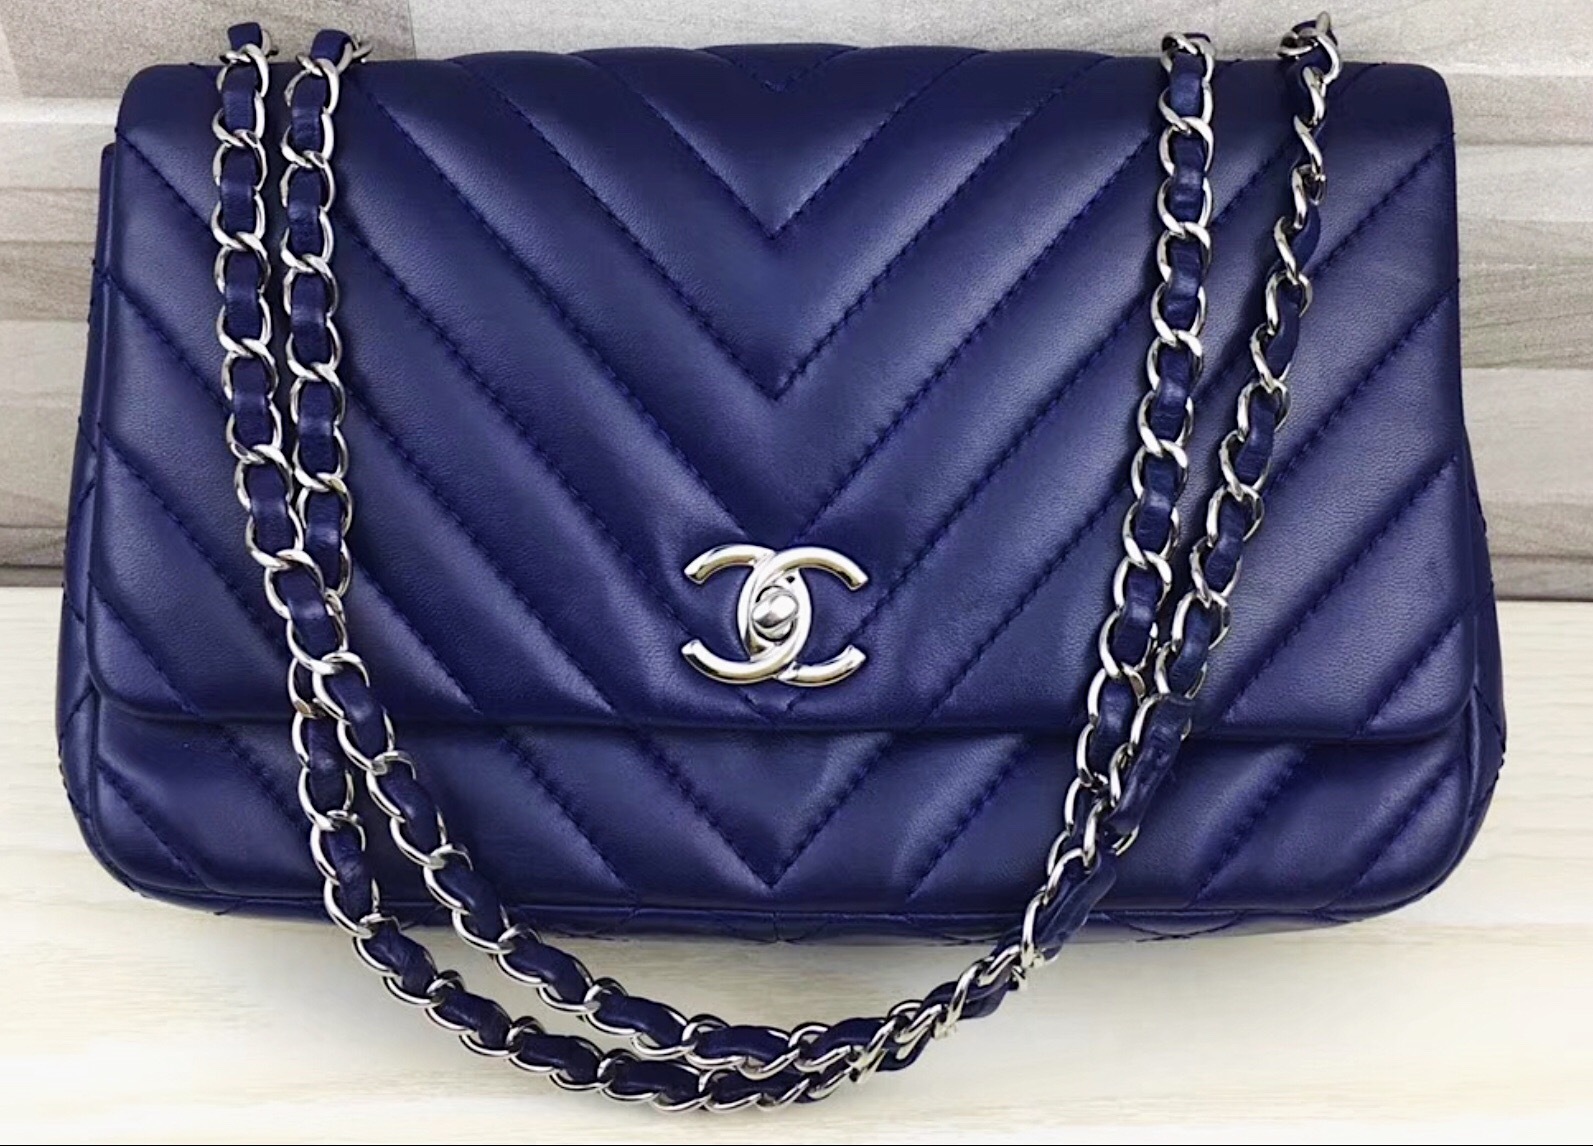 Authentic Chanel Royal Blue Chevron Quilted Lambskin Medium Classic ...